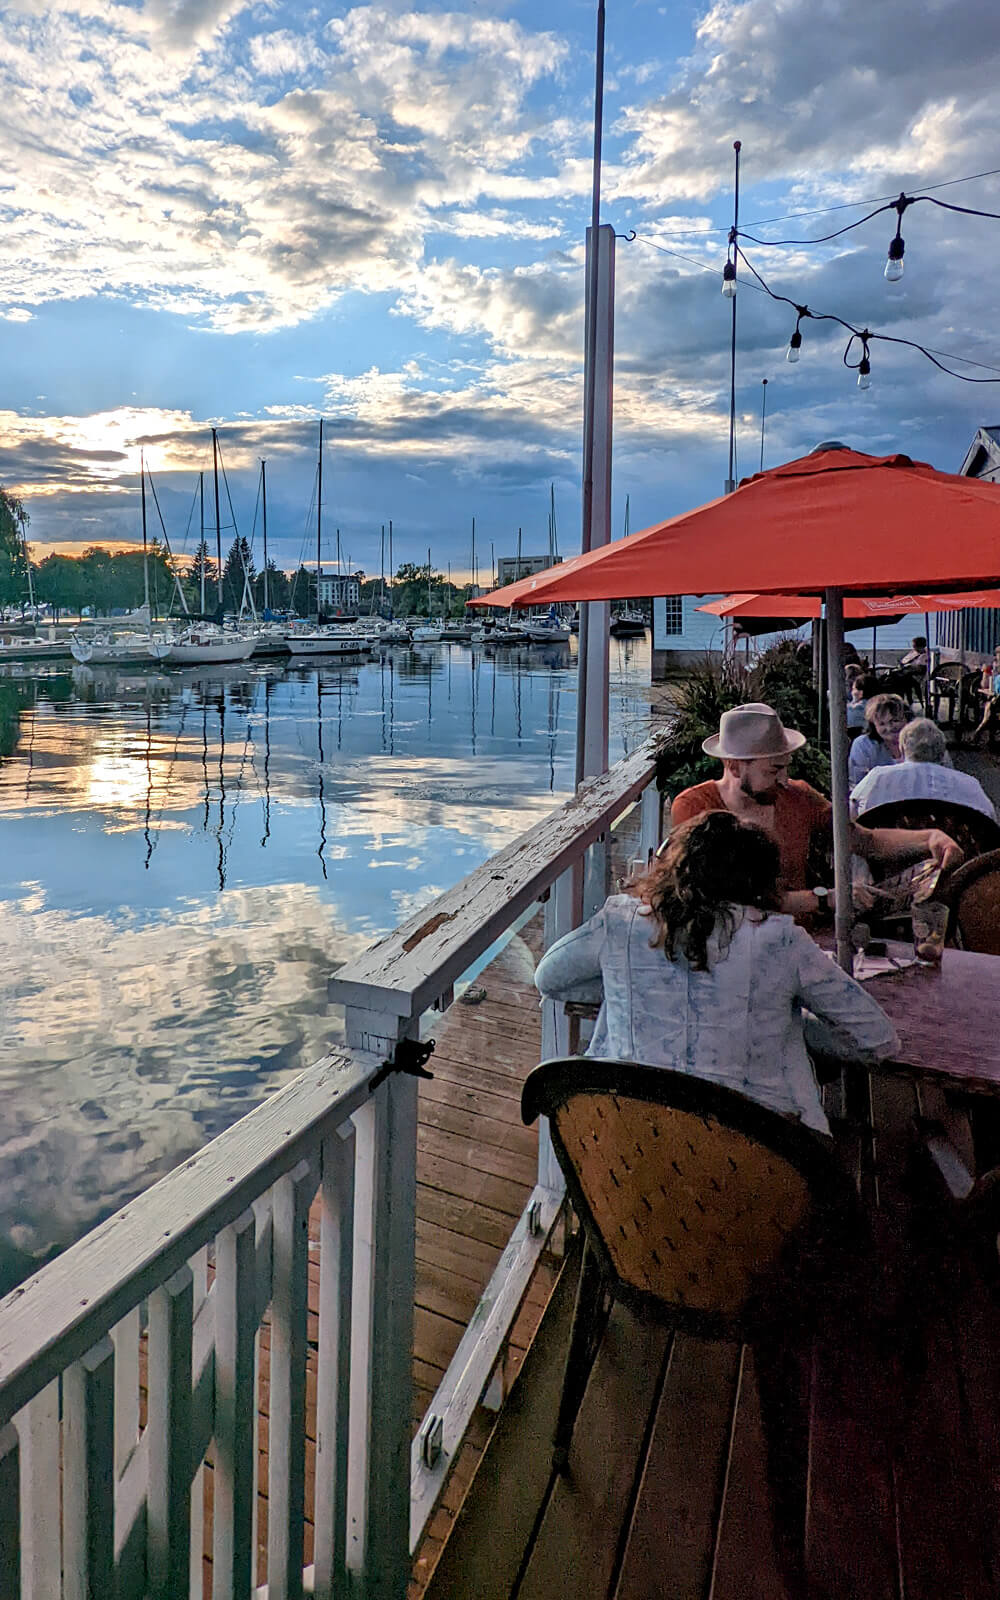 Patio Views at the Boathouse Restaurant in Belleville :: I've Been Bit! Travel Blog